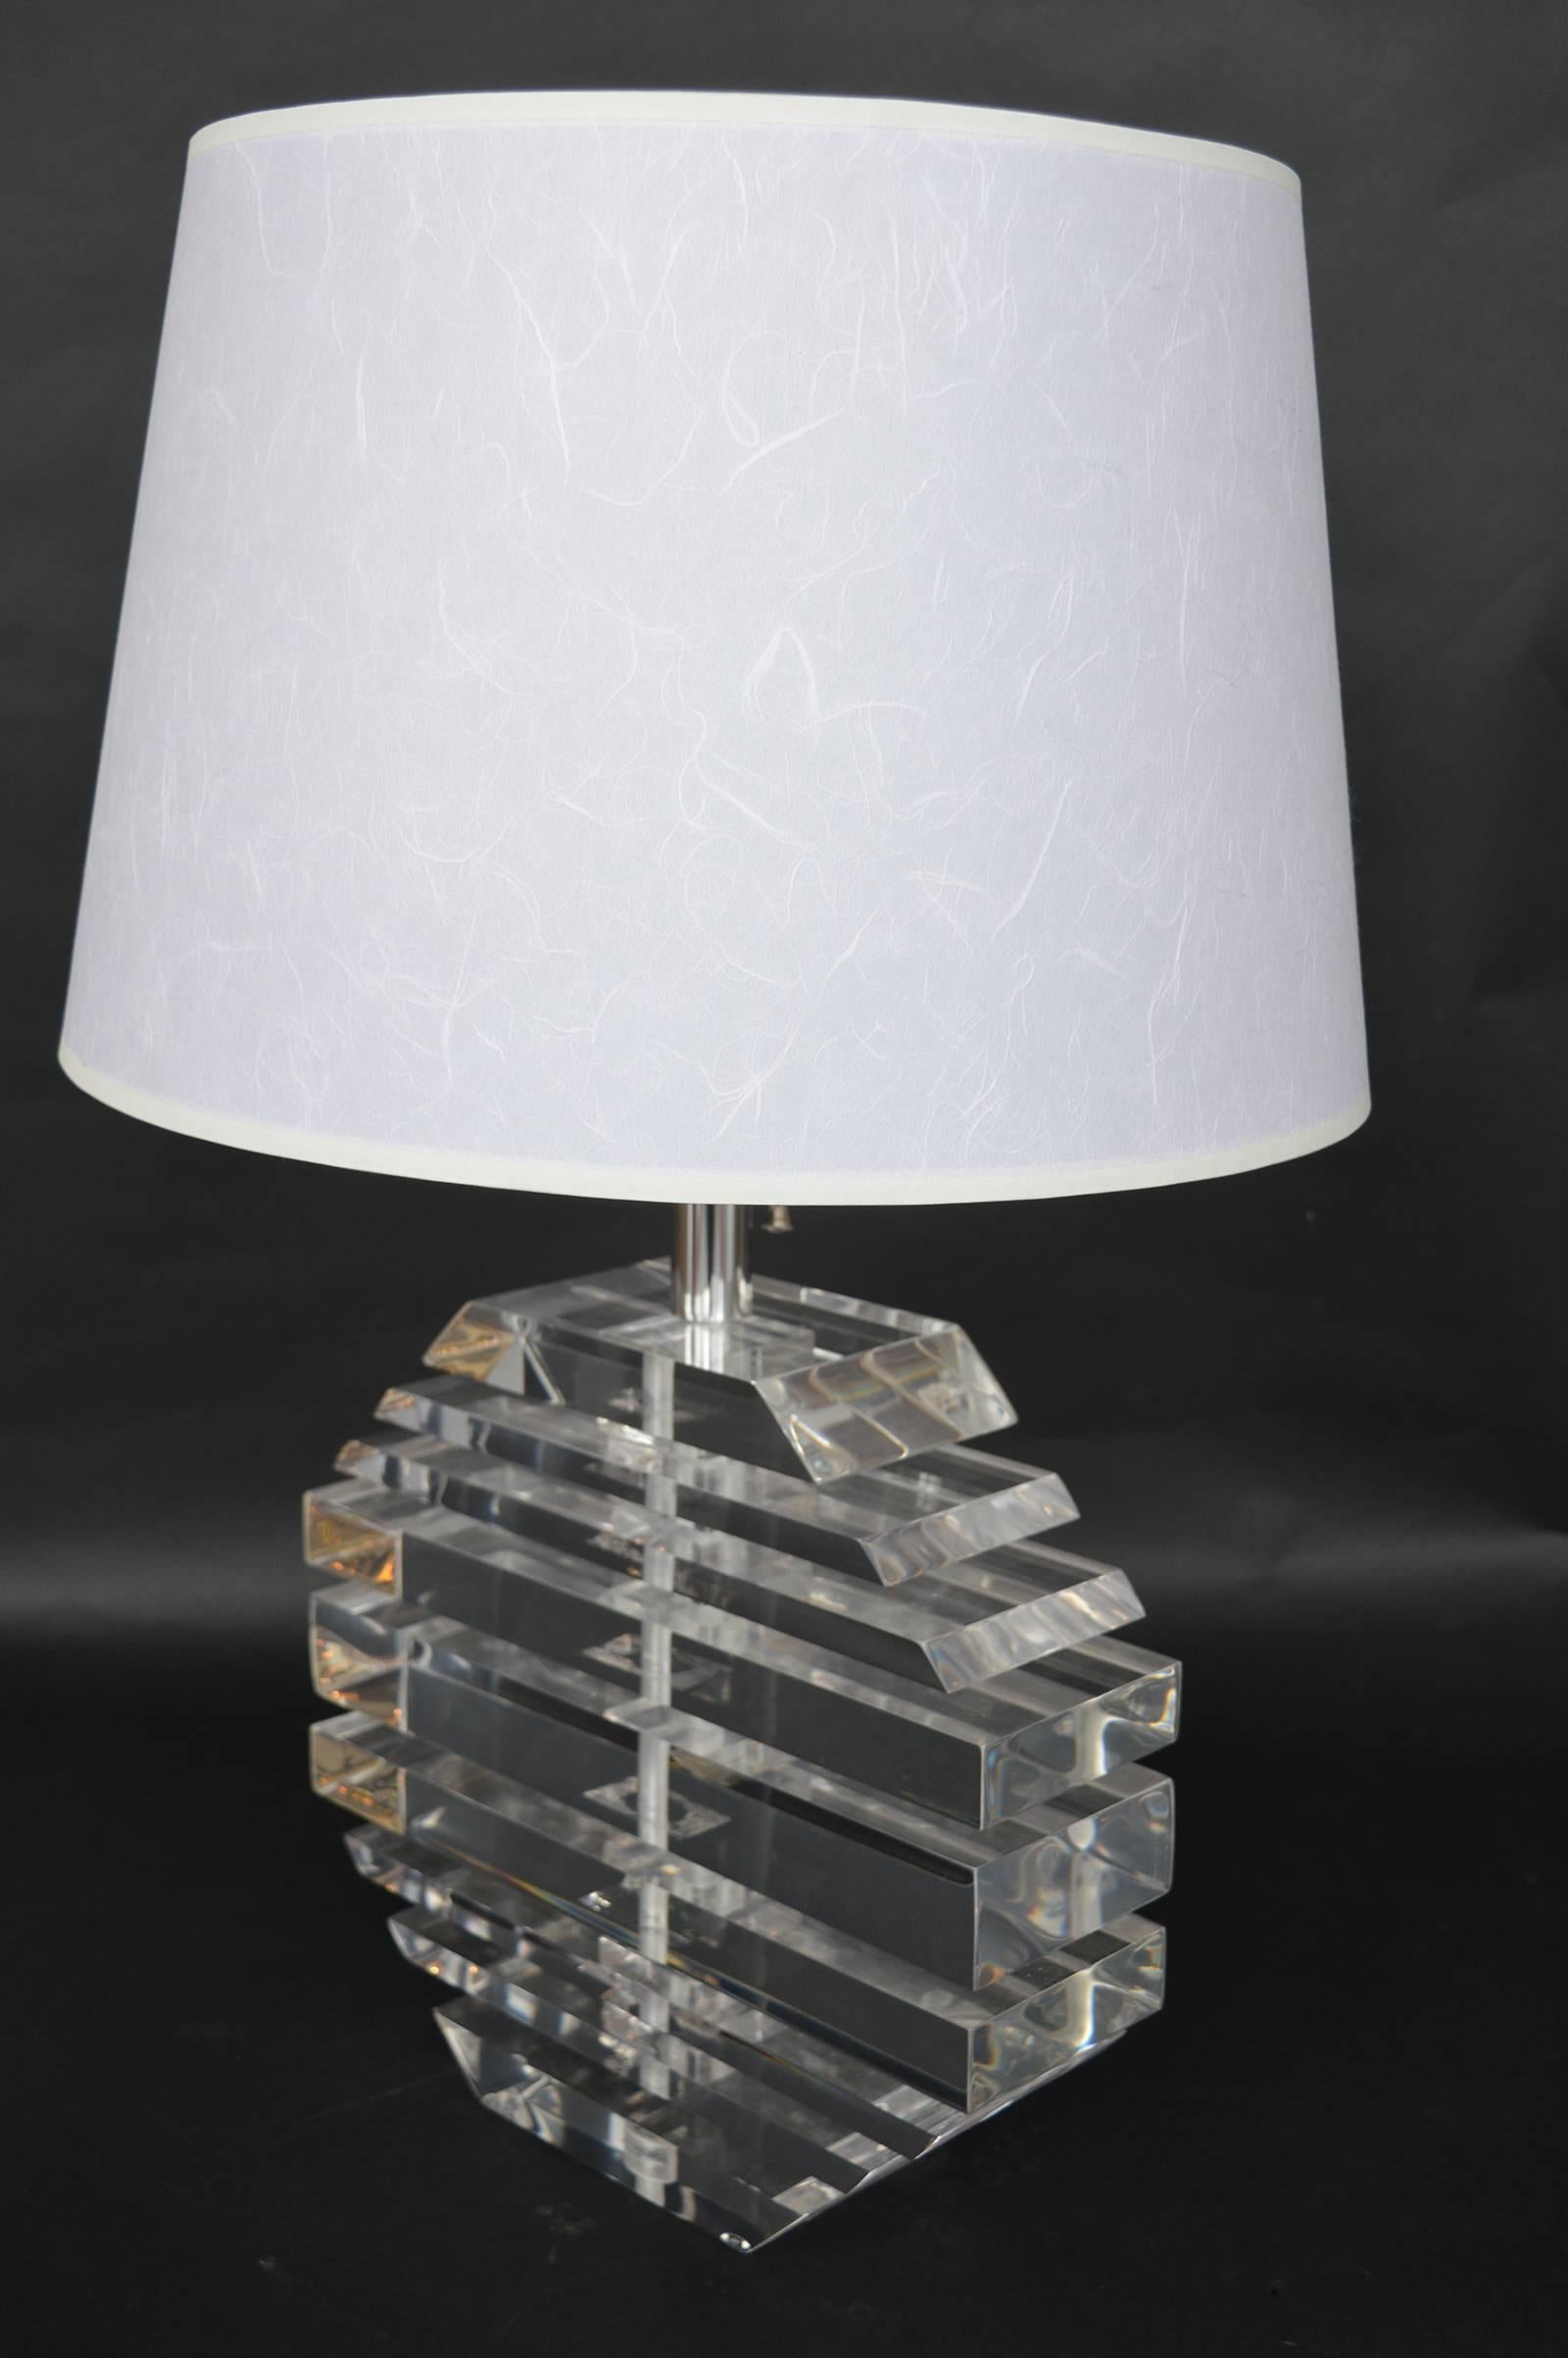 Pair of acrylic lamps.
Measures: 23 inches H x 15 inches D with the shade.